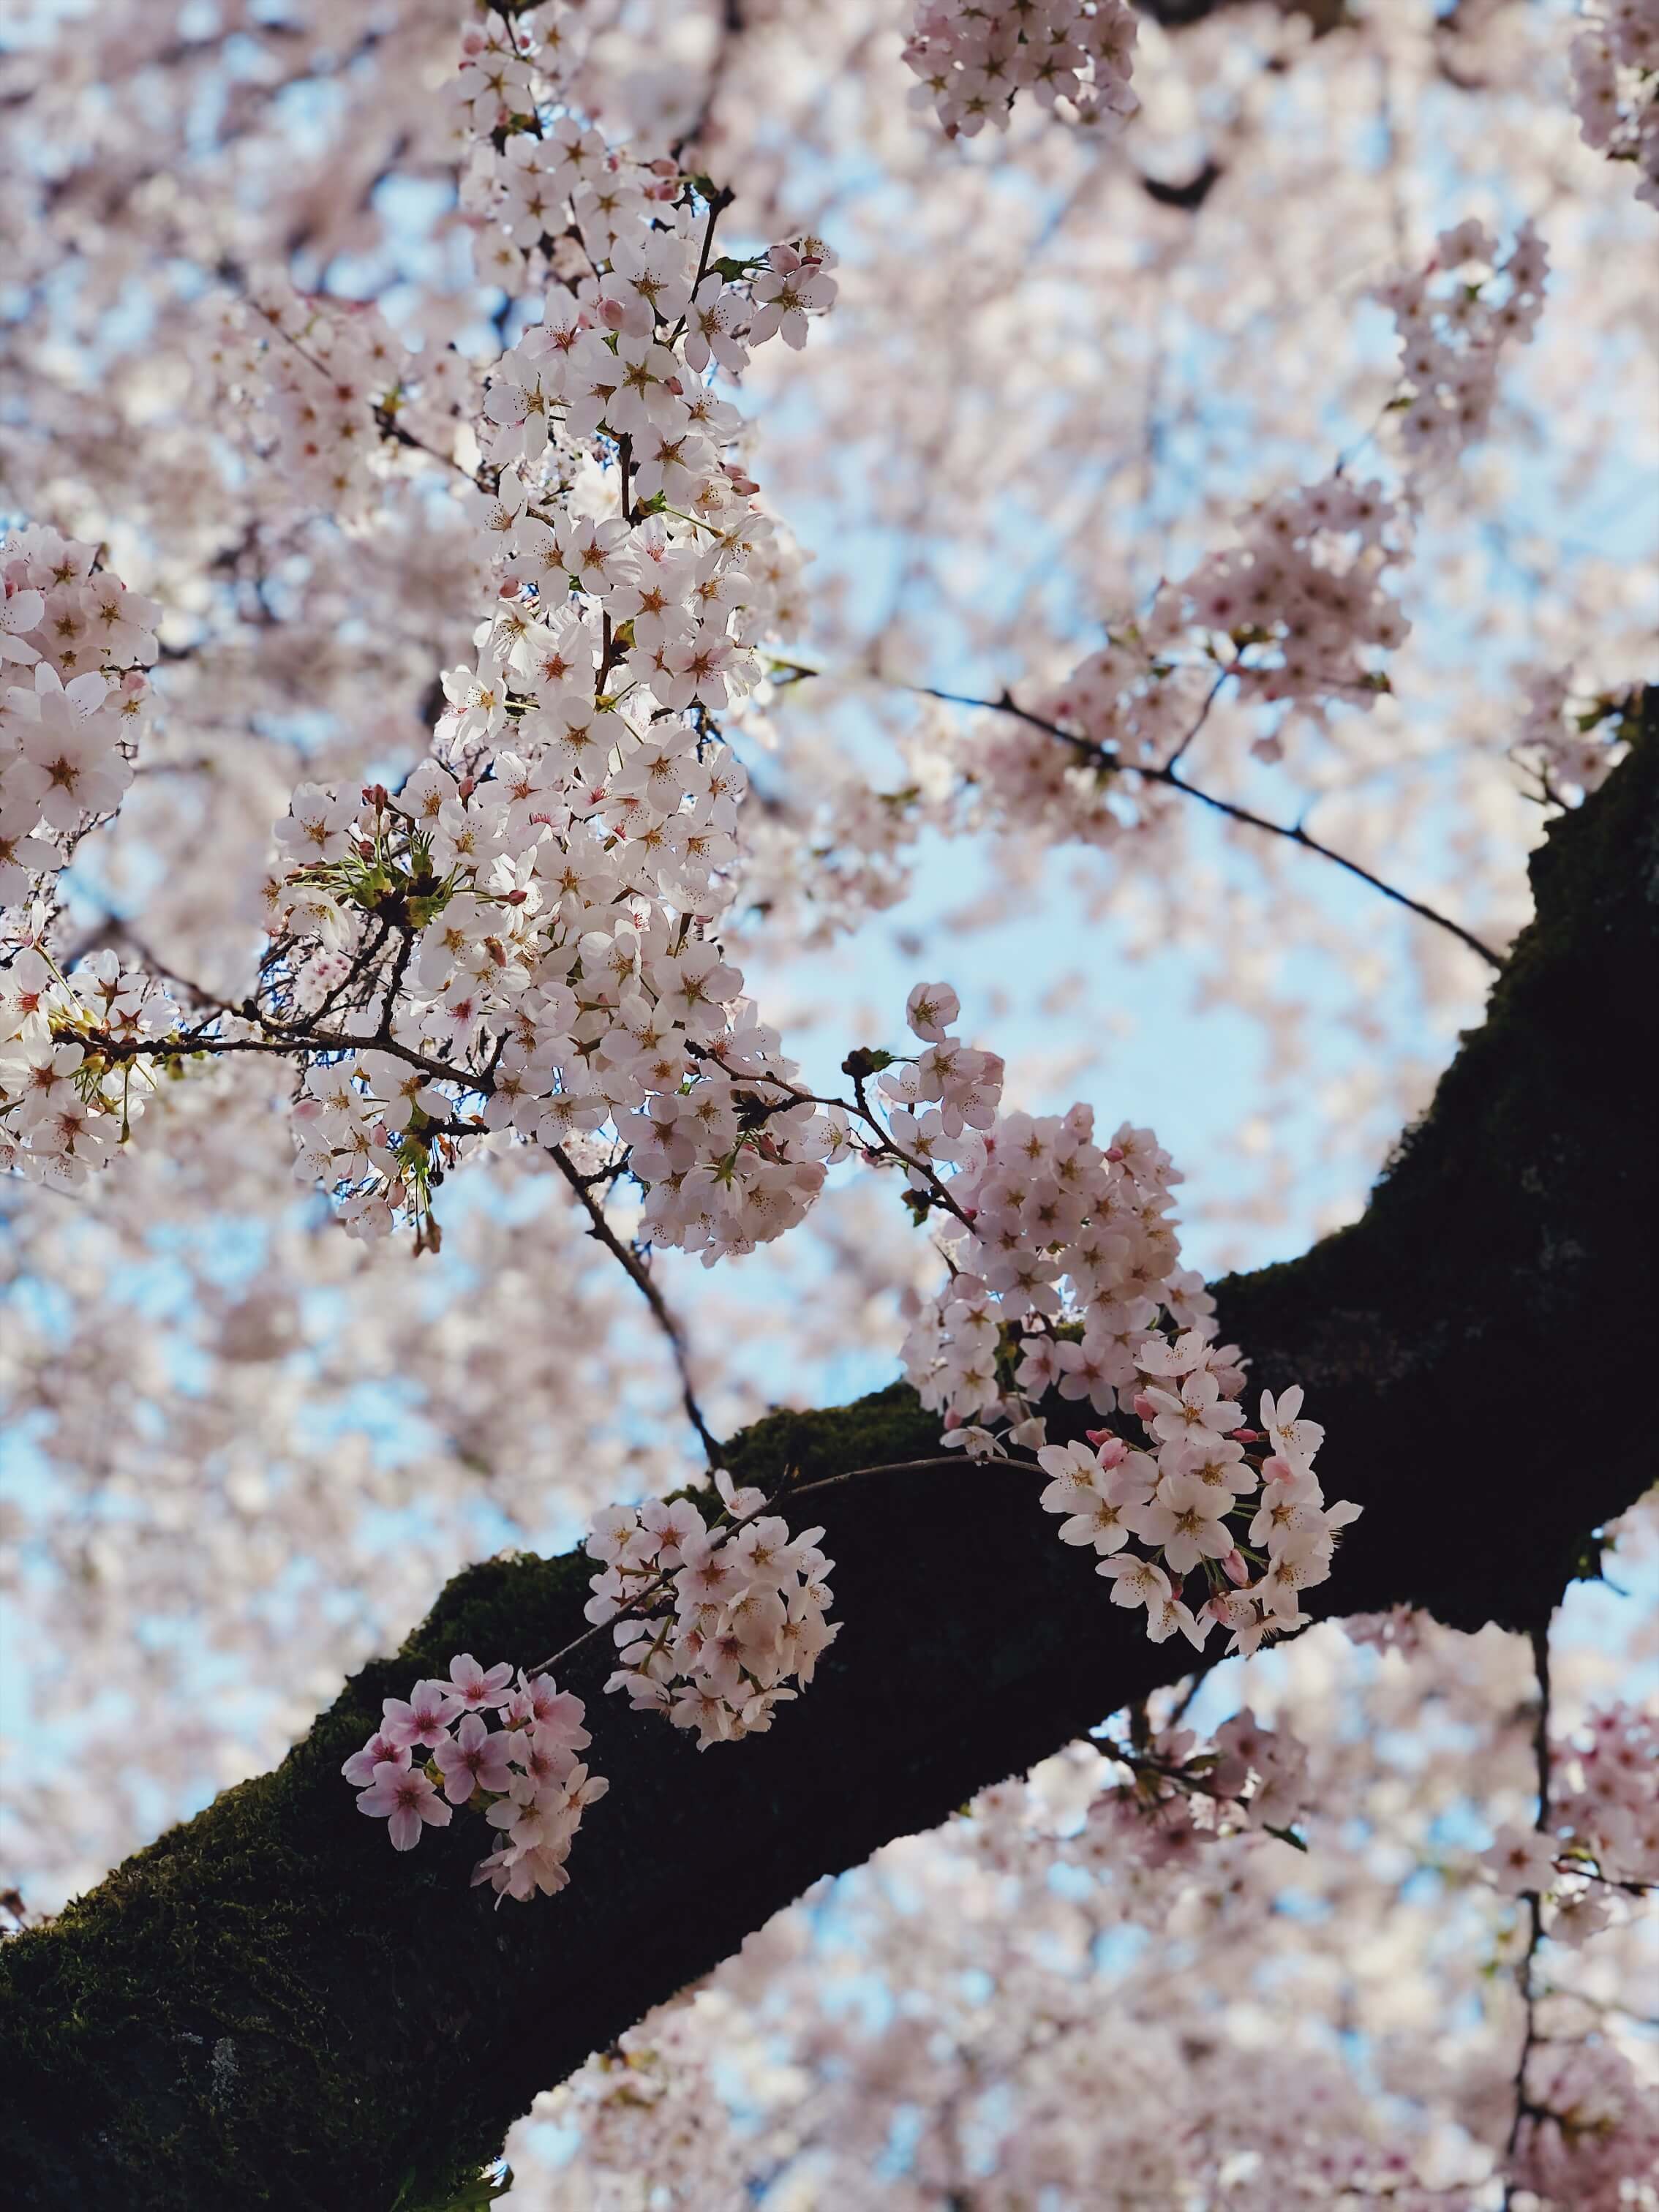 A photo of cherry blossoms.